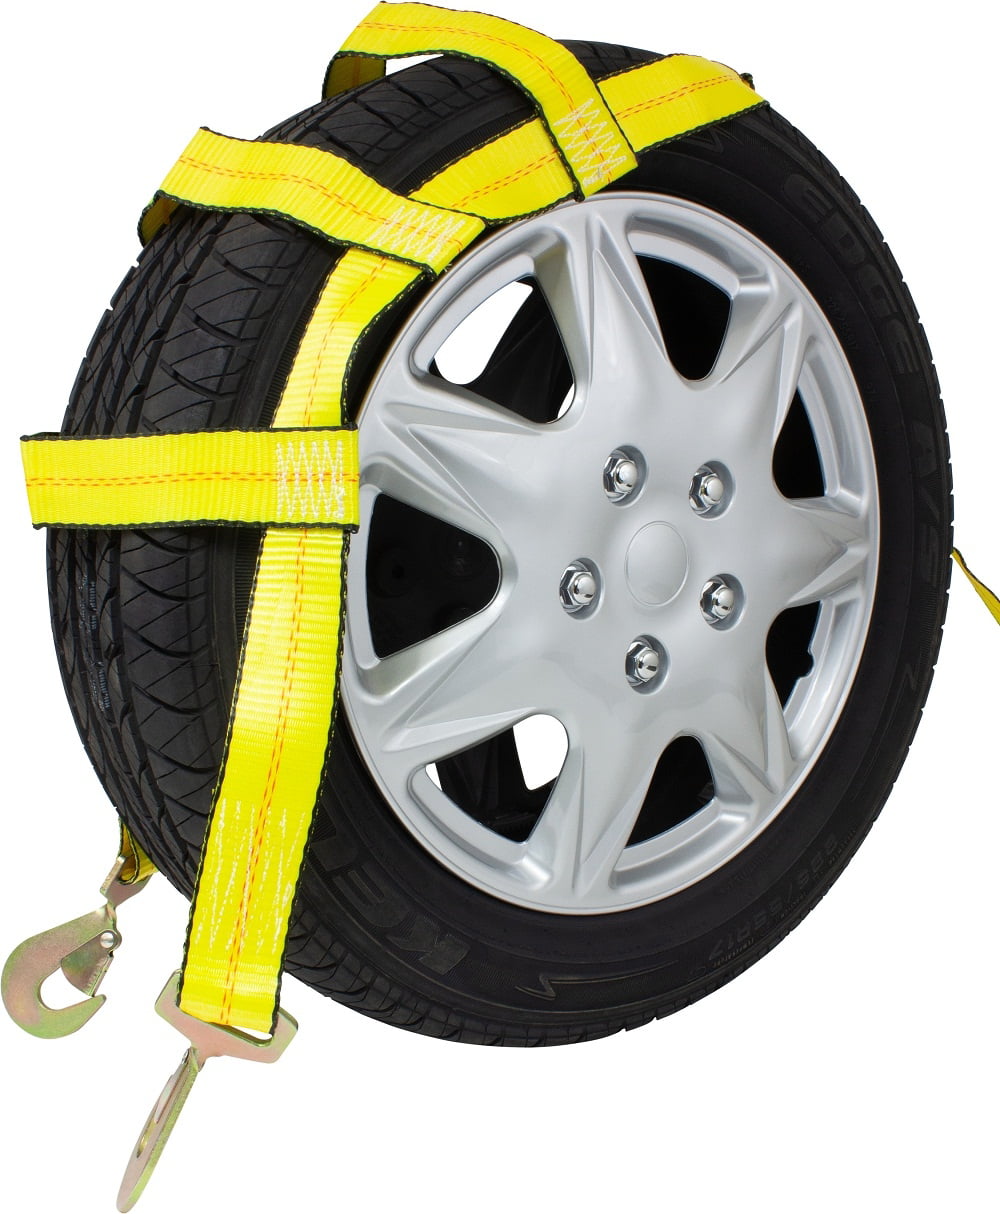 2 Pack Car Tire Basket Net Straps Tow Dolly Wheel Strap with Flat Hooks10000Lbs 